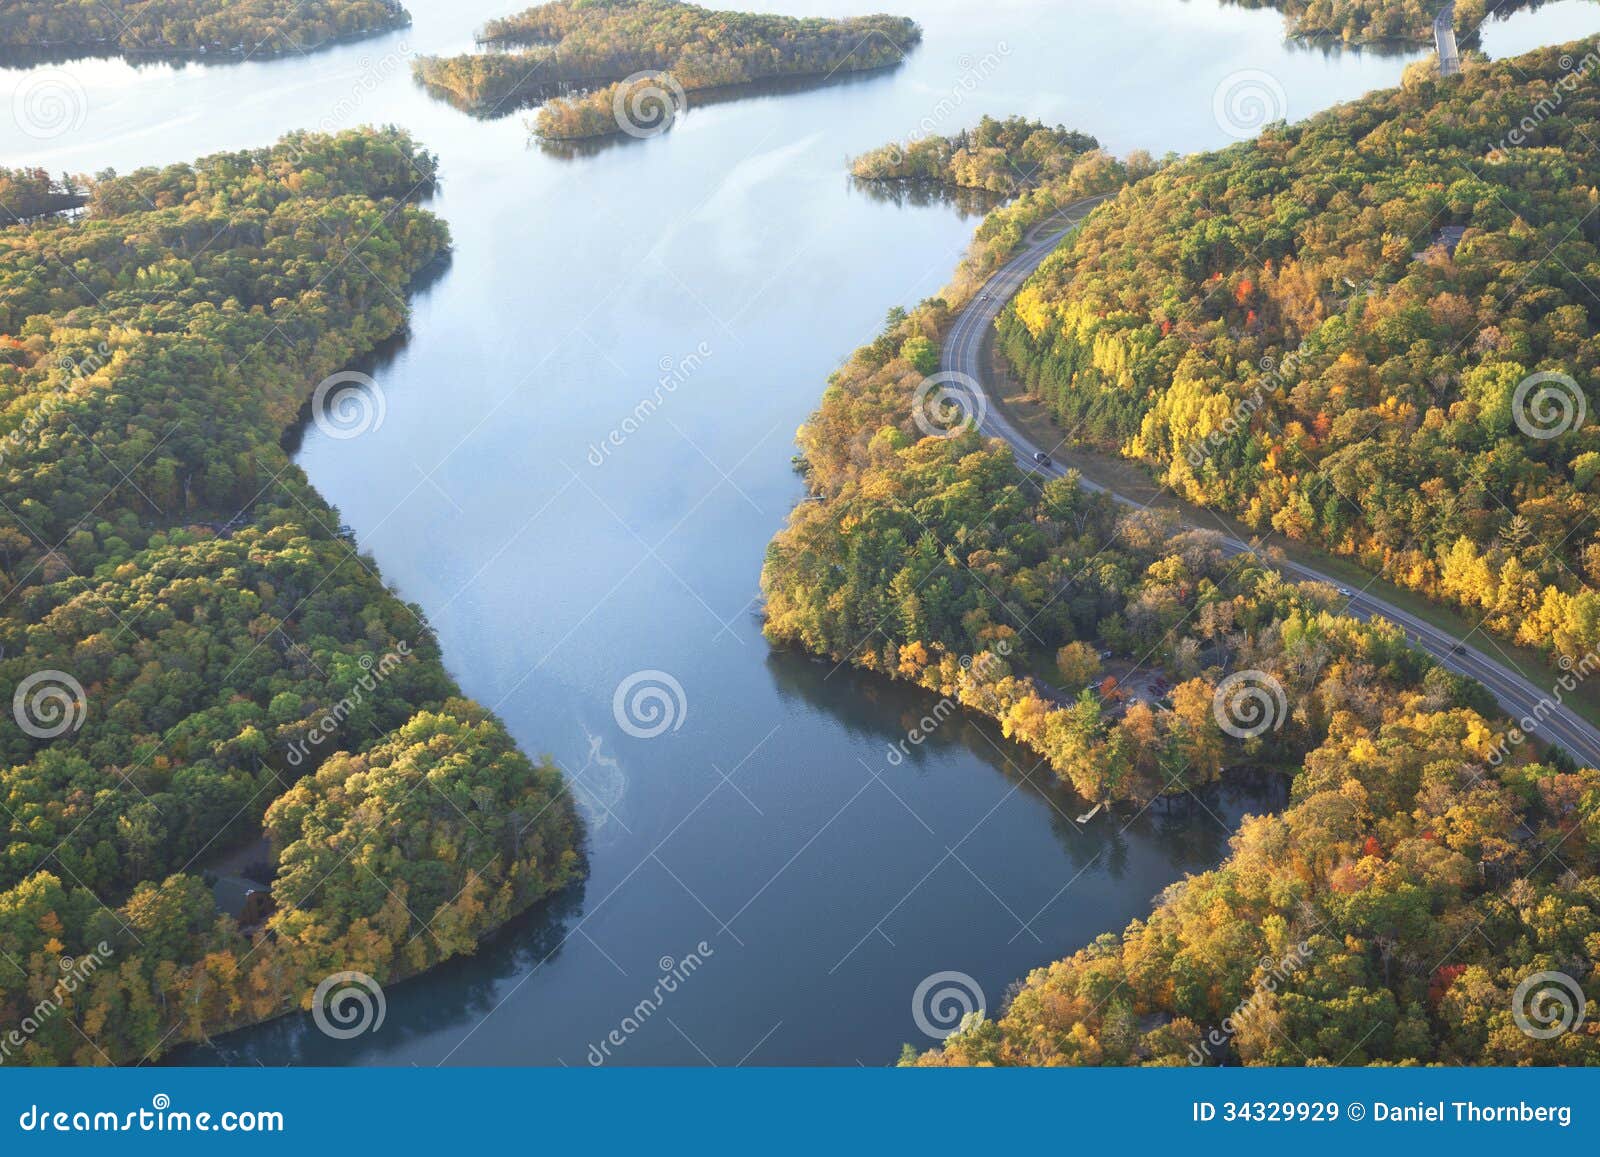 curving road along mississippi river during autumn